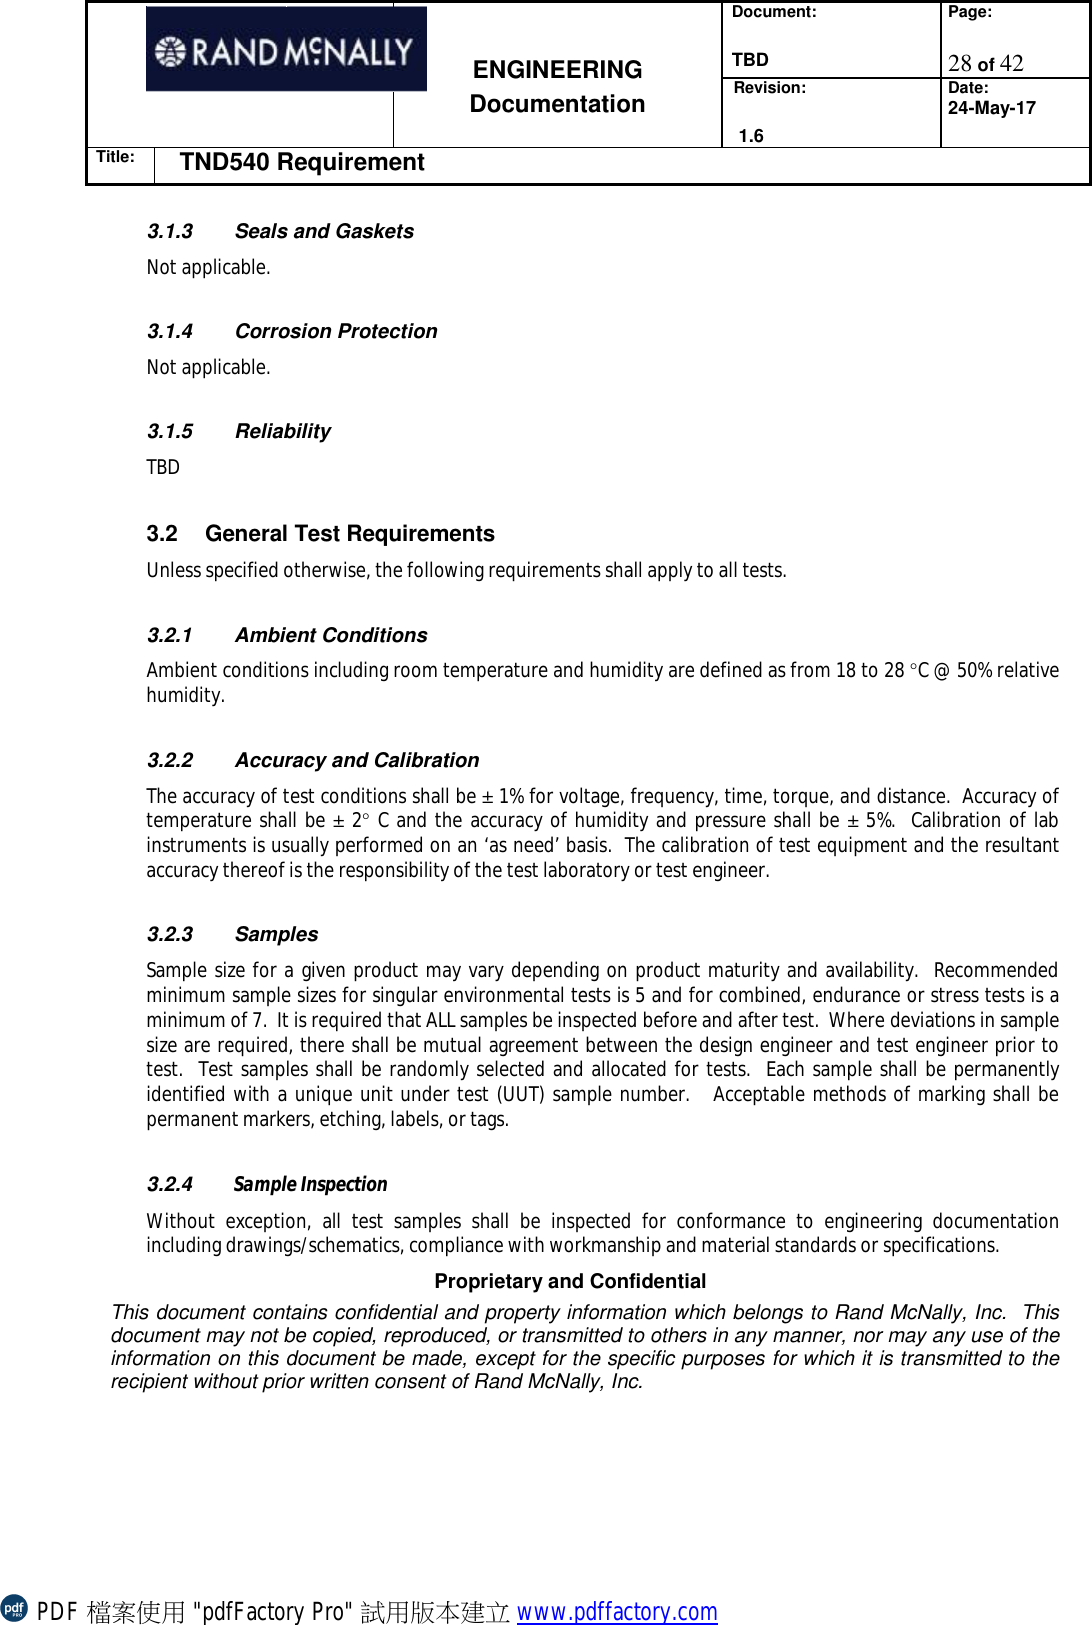 Document:  TBD Page:  28 of 42   ENGINEERING Documentation Revision:   1.6 Date: 24-May-17 Title: TND540 Requirement  Proprietary and Confidential This document contains confidential and property information which belongs to Rand McNally, Inc.  This document may not be copied, reproduced, or transmitted to others in any manner, nor may any use of the information on this document be made, except for the specific purposes for which it is transmitted to the recipient without prior written consent of Rand McNally, Inc.   3.1.3 Seals and Gaskets Not applicable.  3.1.4 Corrosion Protection  Not applicable.  3.1.5 Reliability TBD  3.2 General Test Requirements Unless specified otherwise, the following requirements shall apply to all tests.   3.2.1 Ambient Conditions Ambient conditions including room temperature and humidity are defined as from 18 to 28 °C @ 50% relative humidity.   3.2.2 Accuracy and Calibration The accuracy of test conditions shall be ± 1% for voltage, frequency, time, torque, and distance.  Accuracy of temperature shall be ± 2° C and the accuracy of humidity and pressure shall be ± 5%.  Calibration of lab instruments is usually performed on an ‘as need’ basis.  The calibration of test equipment and the resultant accuracy thereof is the responsibility of the test laboratory or test engineer.   3.2.3 Samples Sample size for a given product may vary depending on product maturity and availability.  Recommended minimum sample sizes for singular environmental tests is 5 and for combined, endurance or stress tests is a minimum of 7.  It is required that ALL samples be inspected before and after test.  Where deviations in sample size are required, there shall be mutual agreement between the design engineer and test engineer prior to test.  Test samples shall be randomly selected and allocated for tests.  Each sample shall be permanently identified with a unique unit under test (UUT) sample number.   Acceptable methods of marking shall be permanent markers, etching, labels, or tags.  3.2.4  Sample Inspection Without exception, all test samples shall be inspected for conformance to engineering documentation including drawings/schematics, compliance with workmanship and material standards or specifications. PDF 檔案使用 &quot;pdfFactory Pro&quot; 試用版本建立 www.pdffactory.com